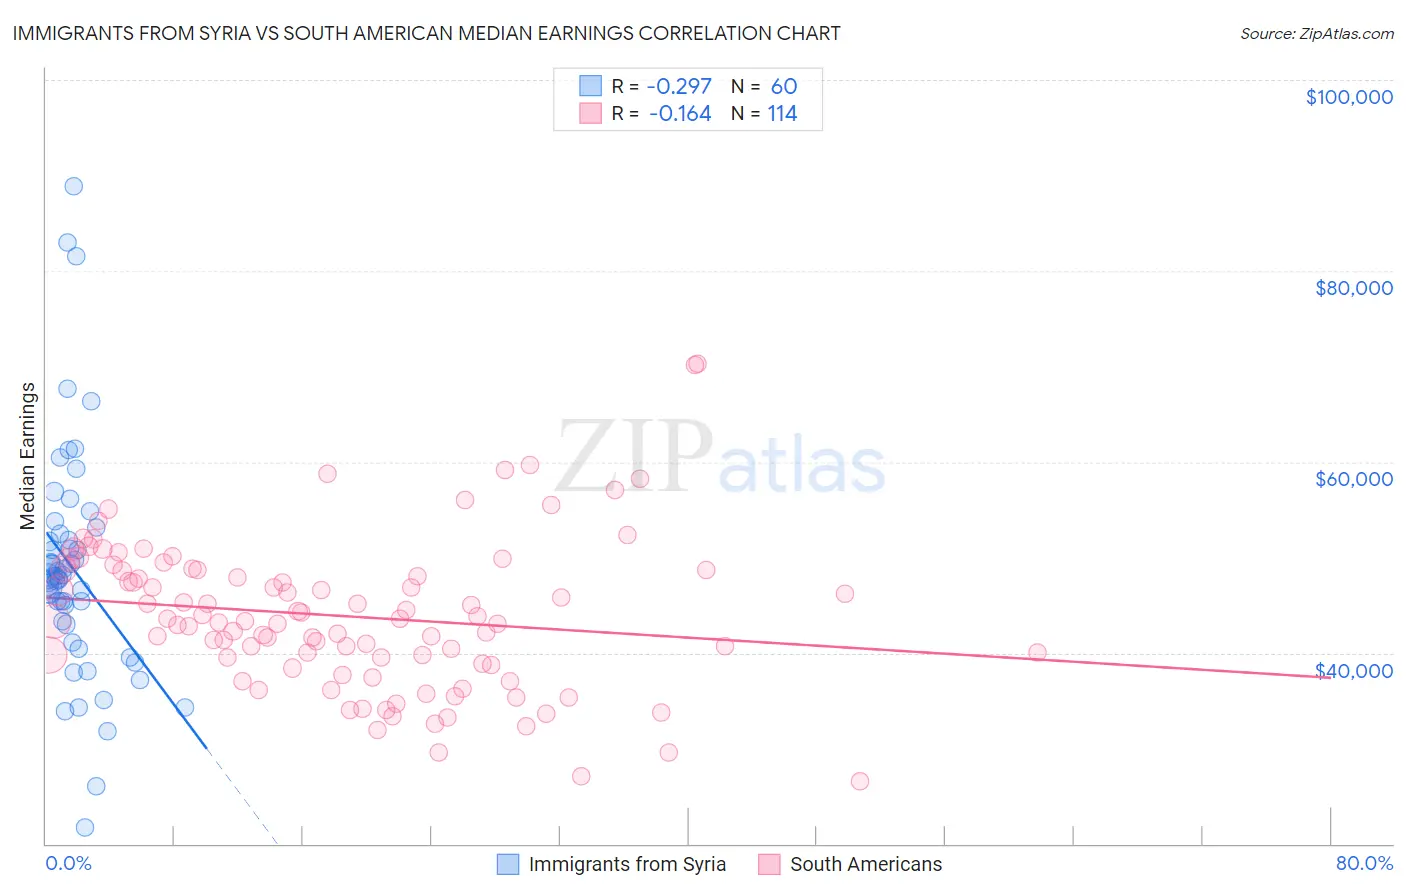 Immigrants from Syria vs South American Median Earnings